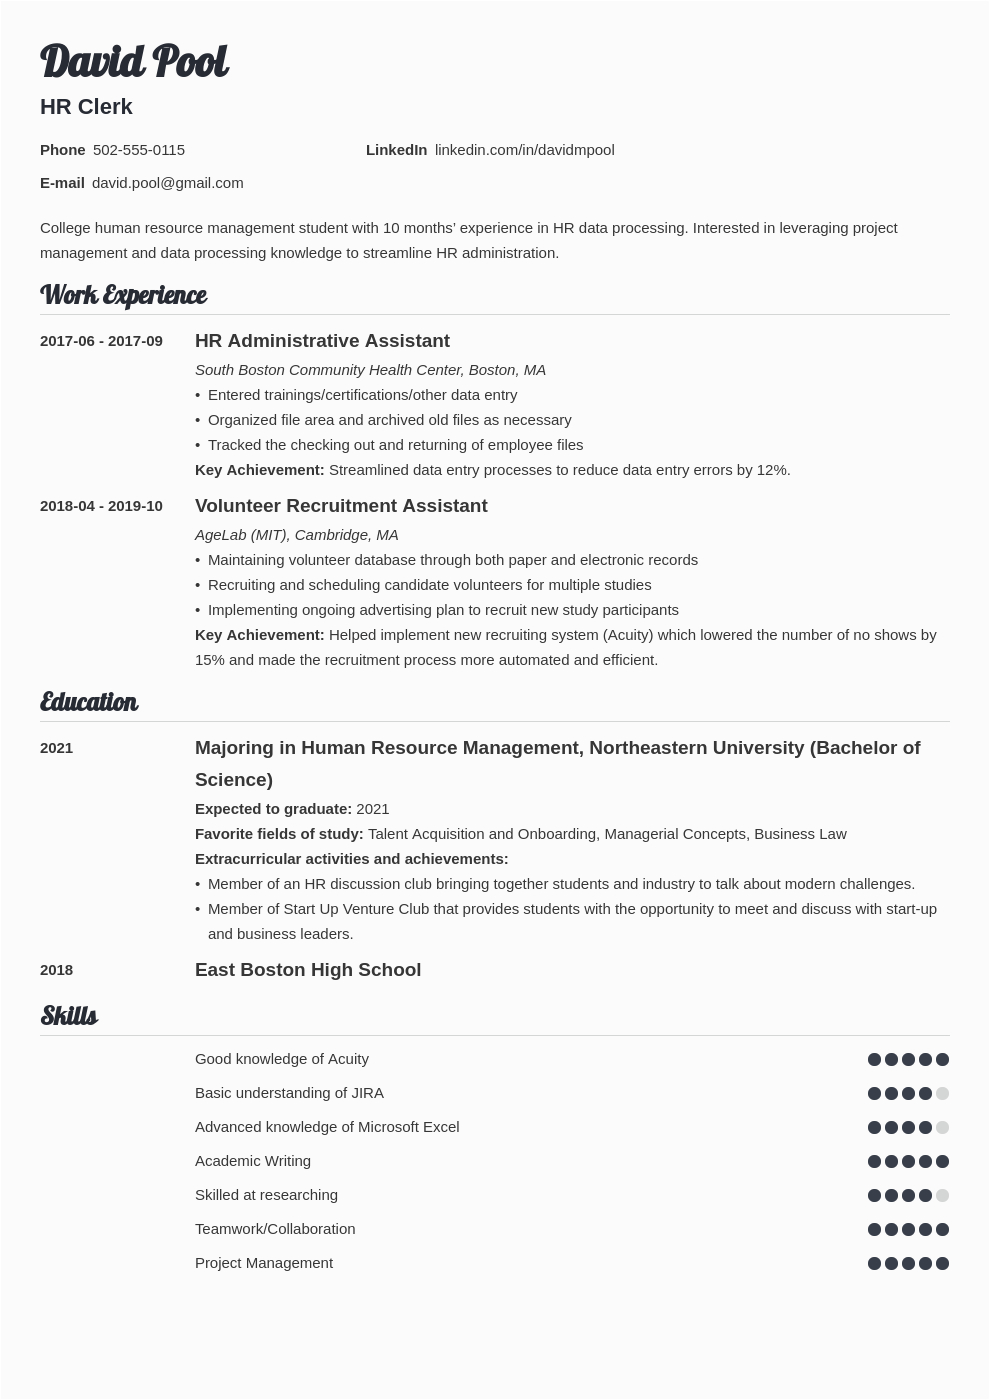 Resume Template for Freshman College Student College Freshman Resume Template & Guide [20 Examples]